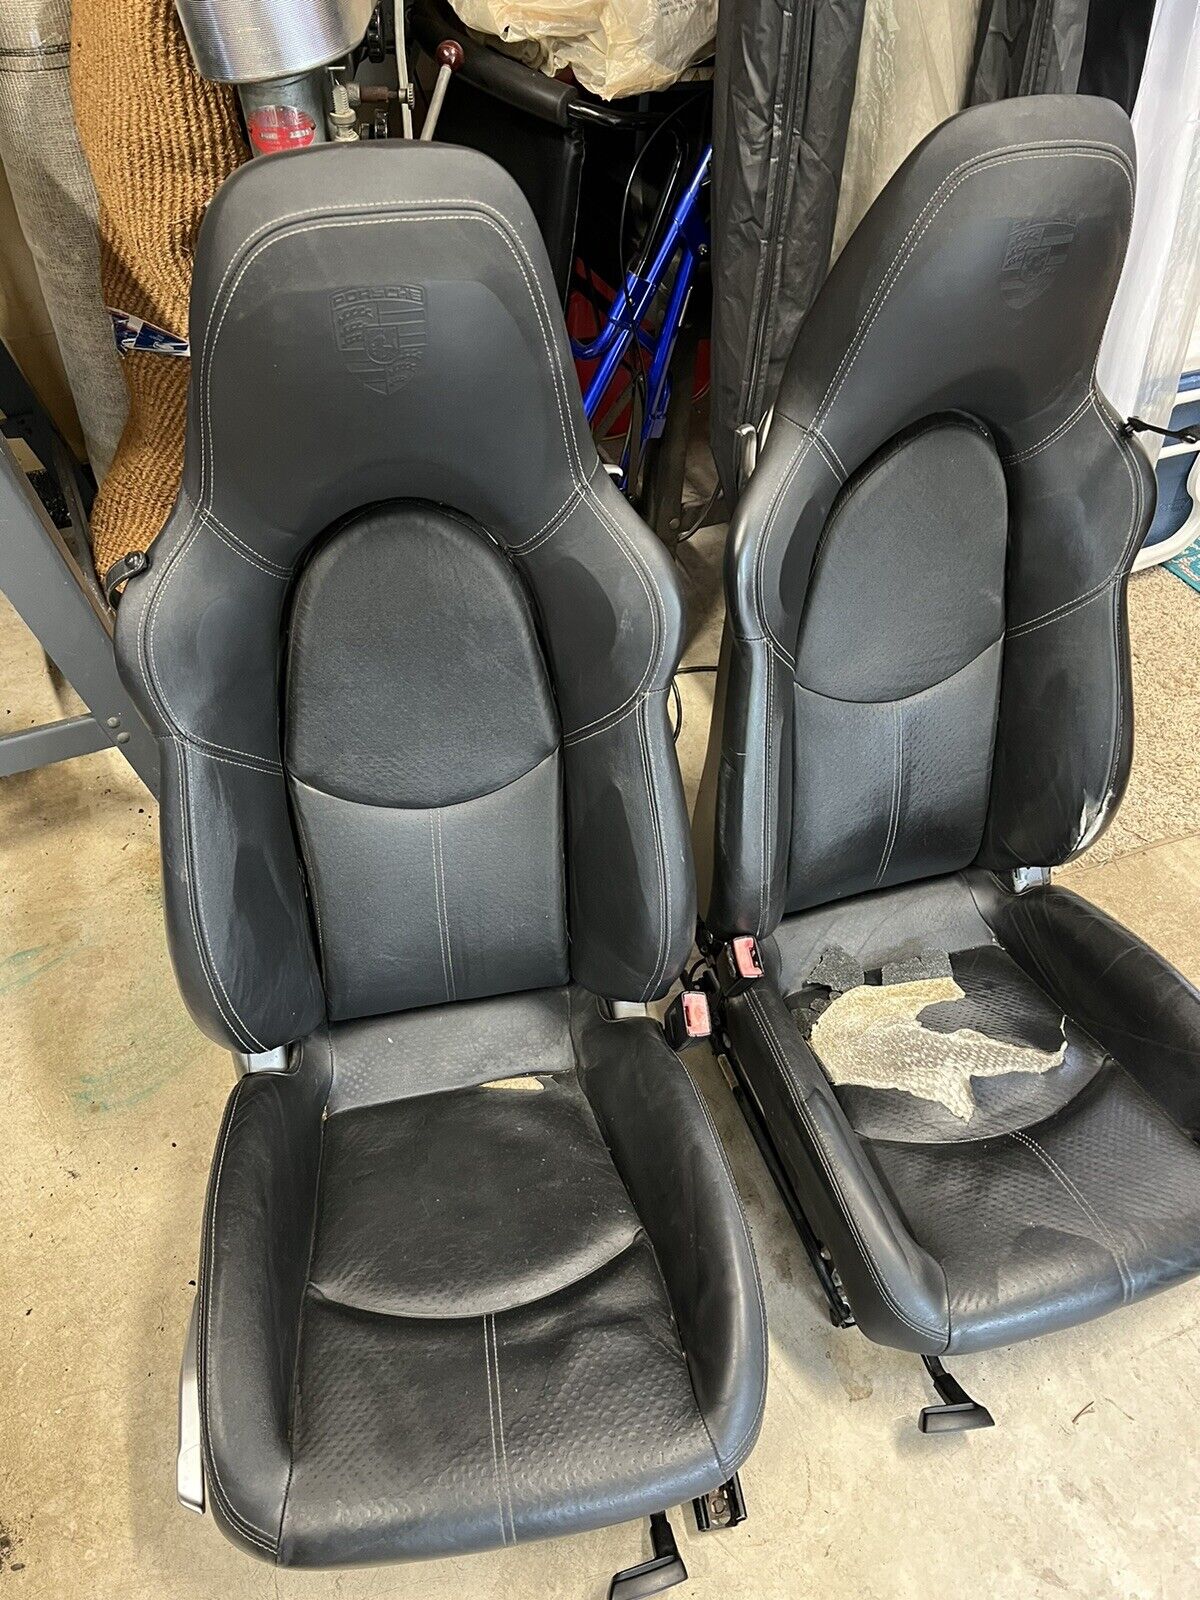 2007 Porsche Boxster S Seats with Porsche Embossed Headrest & New Leather Covers